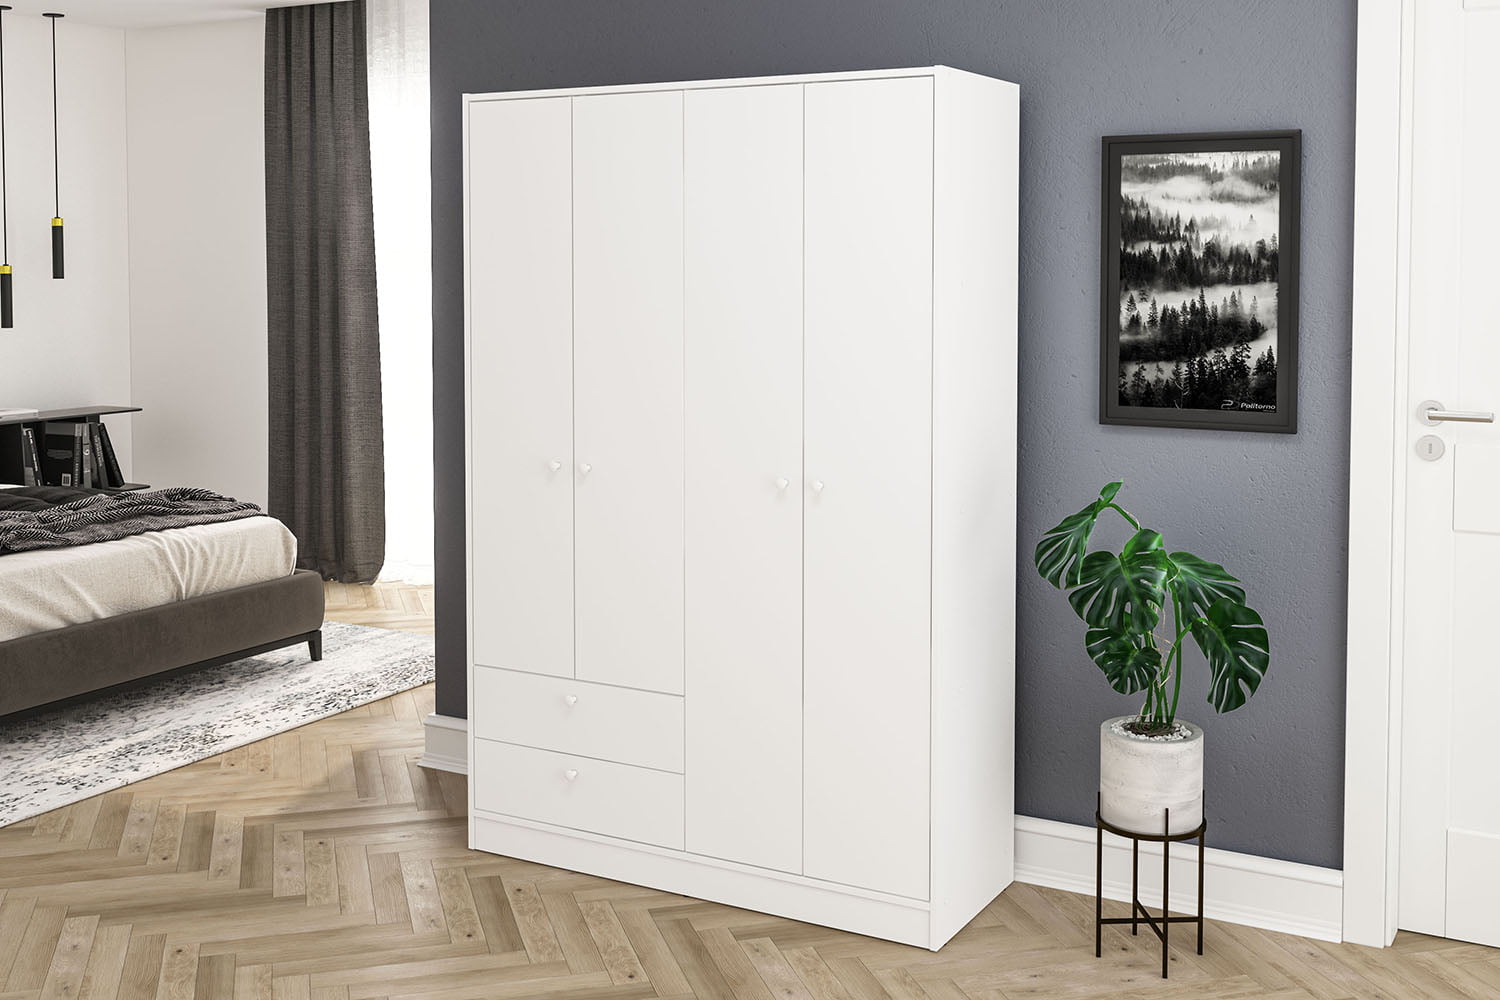 Polifurniture Denmark 4 Door Bedroom Armoire with Drawers, White